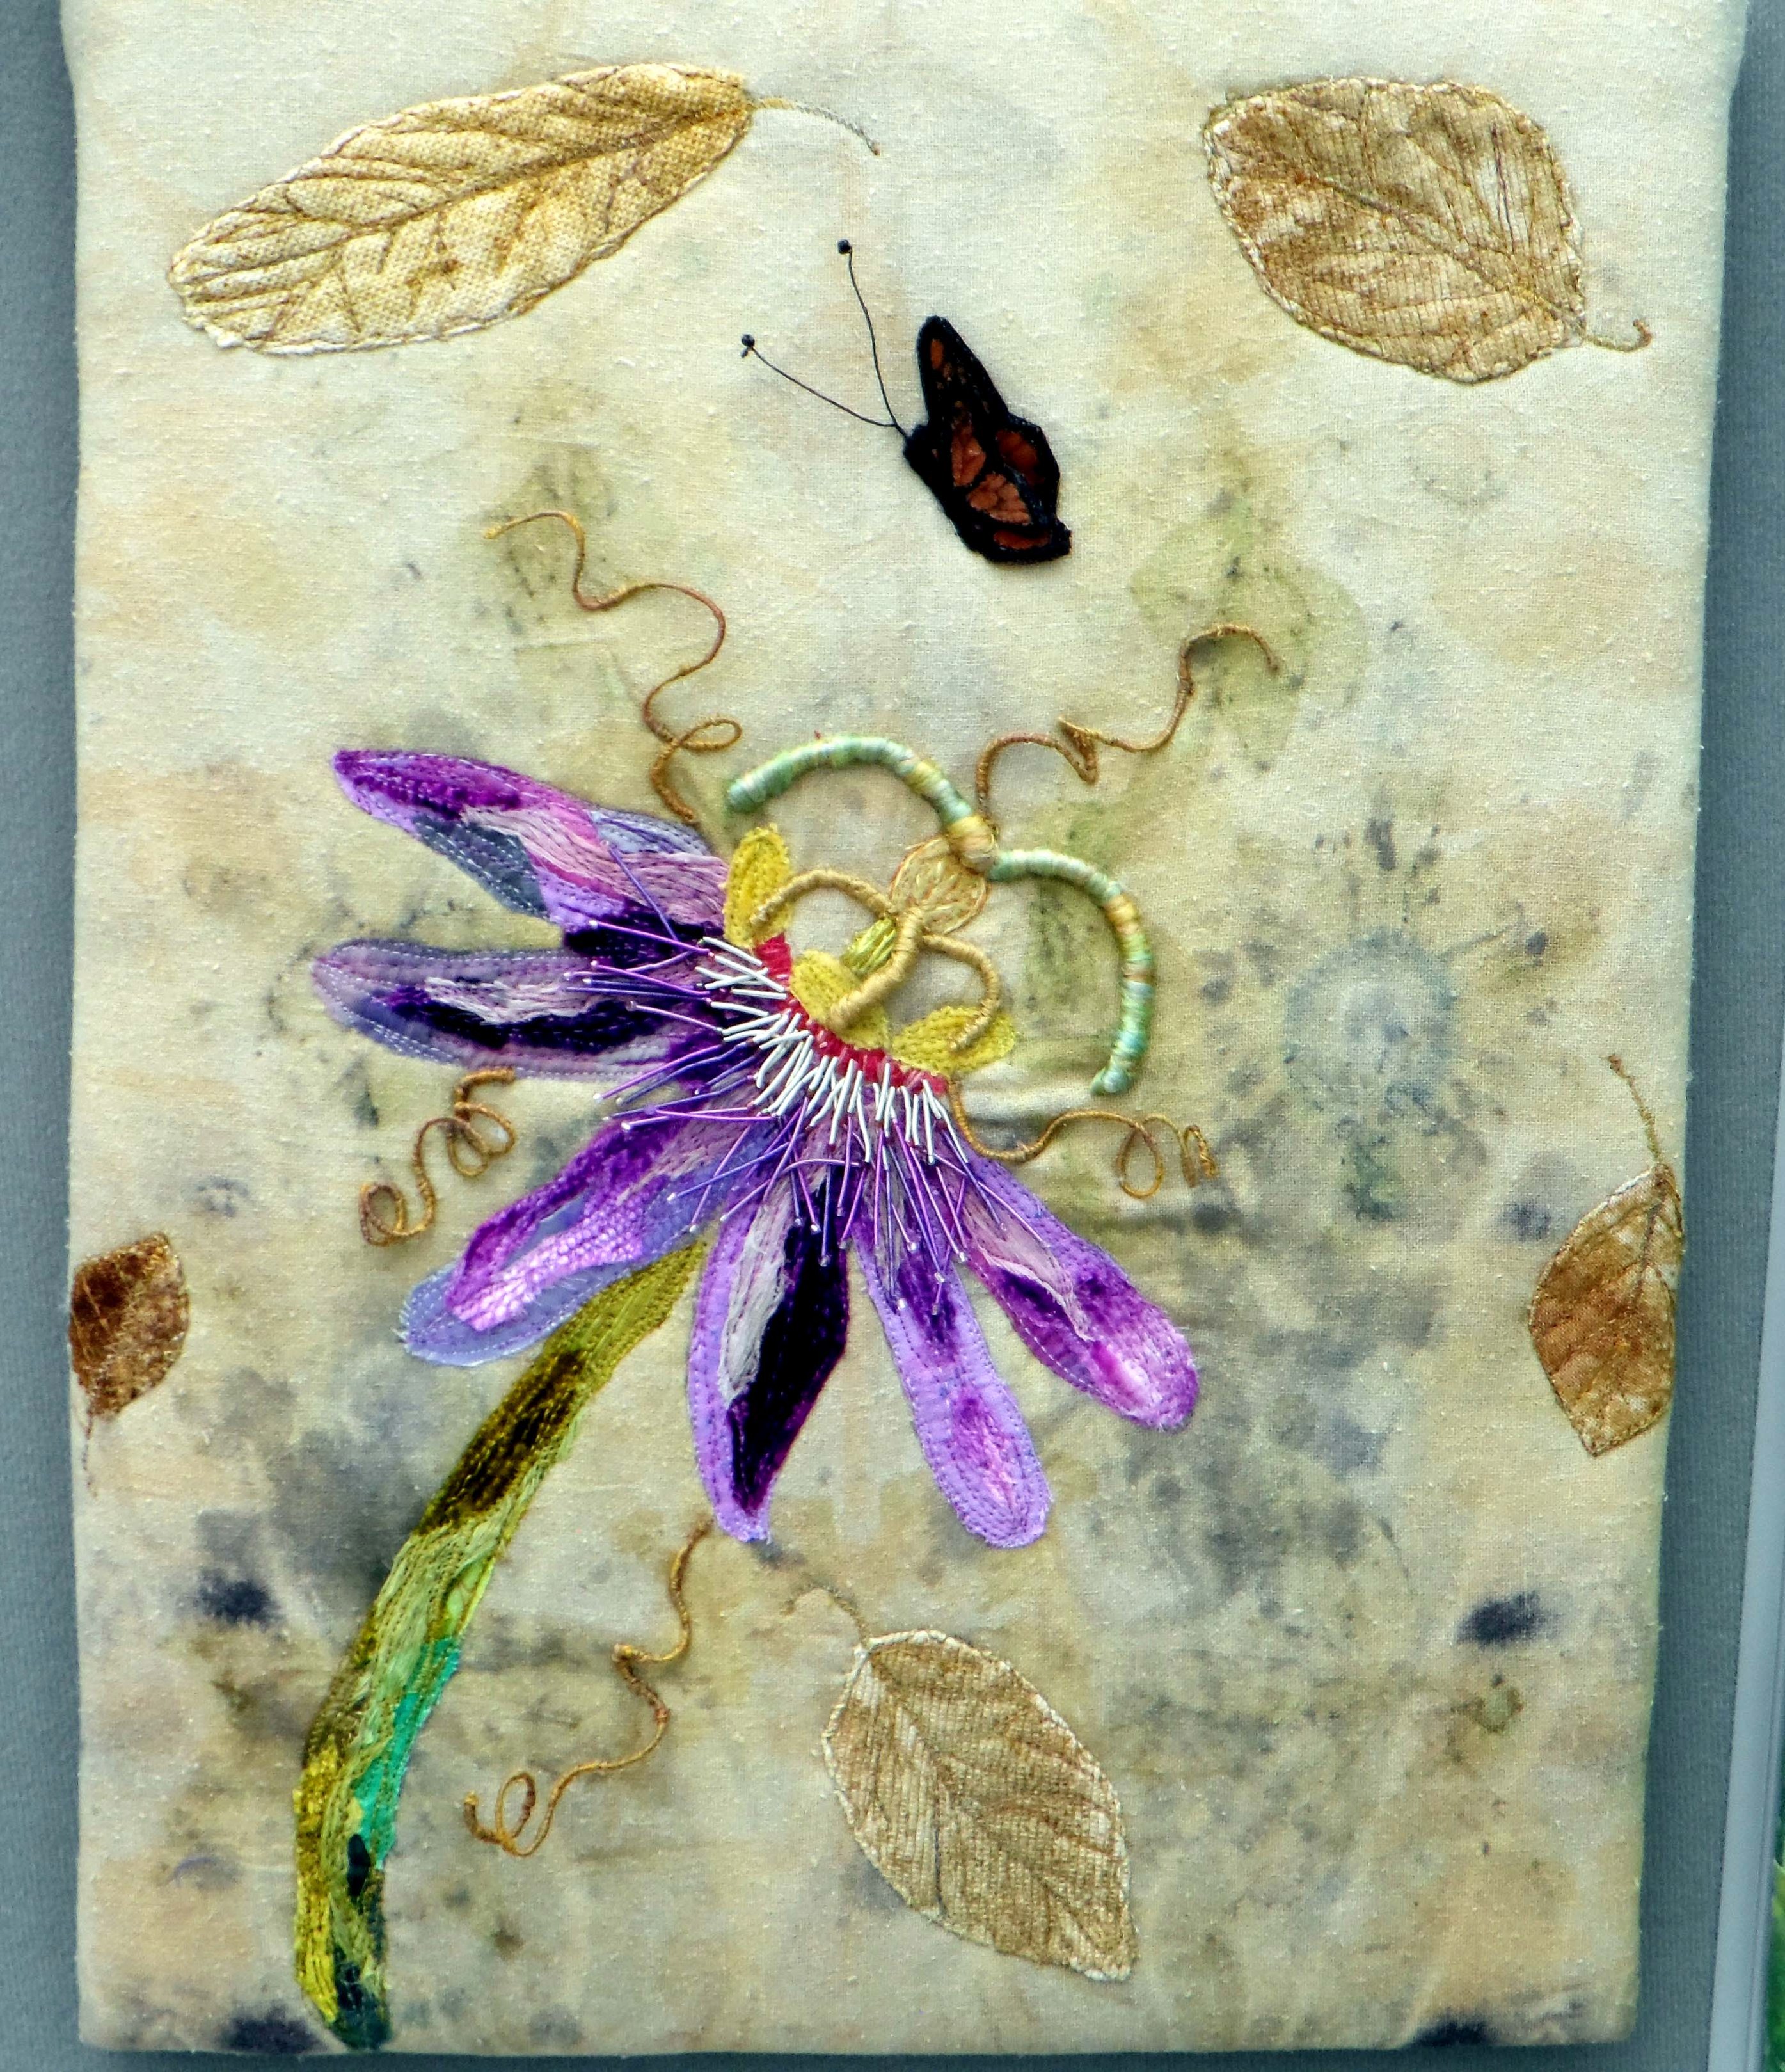 PASSIONFLOWER by Mal Ralston, ecoprinted background with hand stitch, beading and wiring, Contemporary Threads exhibition, Sefton Palm House, Feb 2022